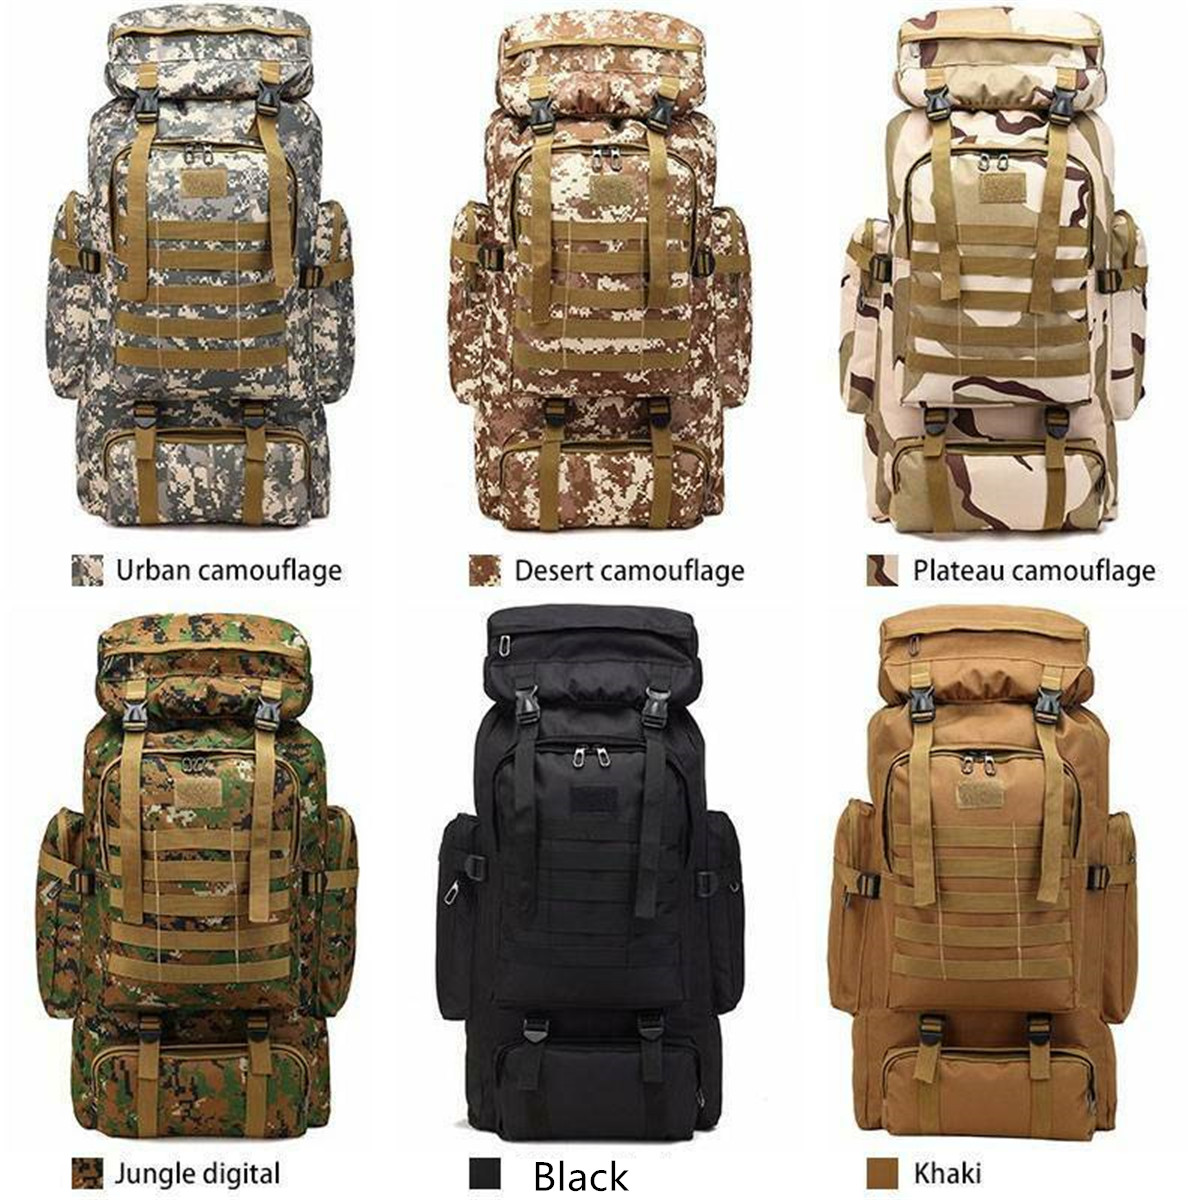 80L-Molle-Tactical-Bag-Outdoor-Traveling-Camping-Hiking-Military-Rucksacks-Backpack-Camouflage-Bag-1556947-8